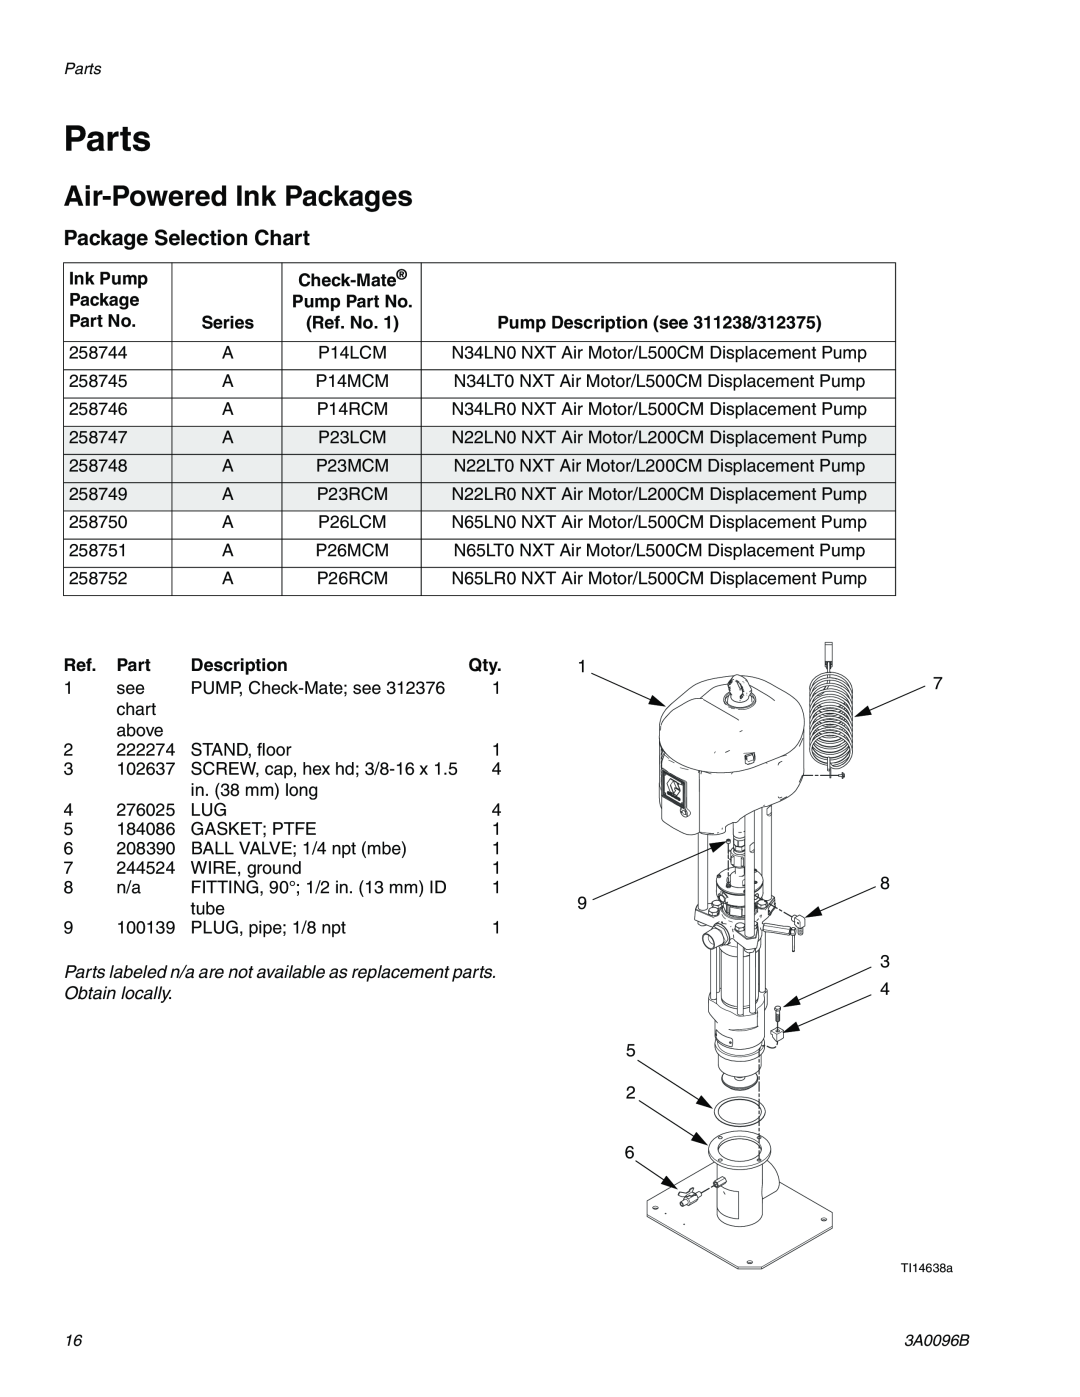 Graco 3A0096B important safety instructions Parts, Air-Powered Ink Packages, Package Selection Chart 